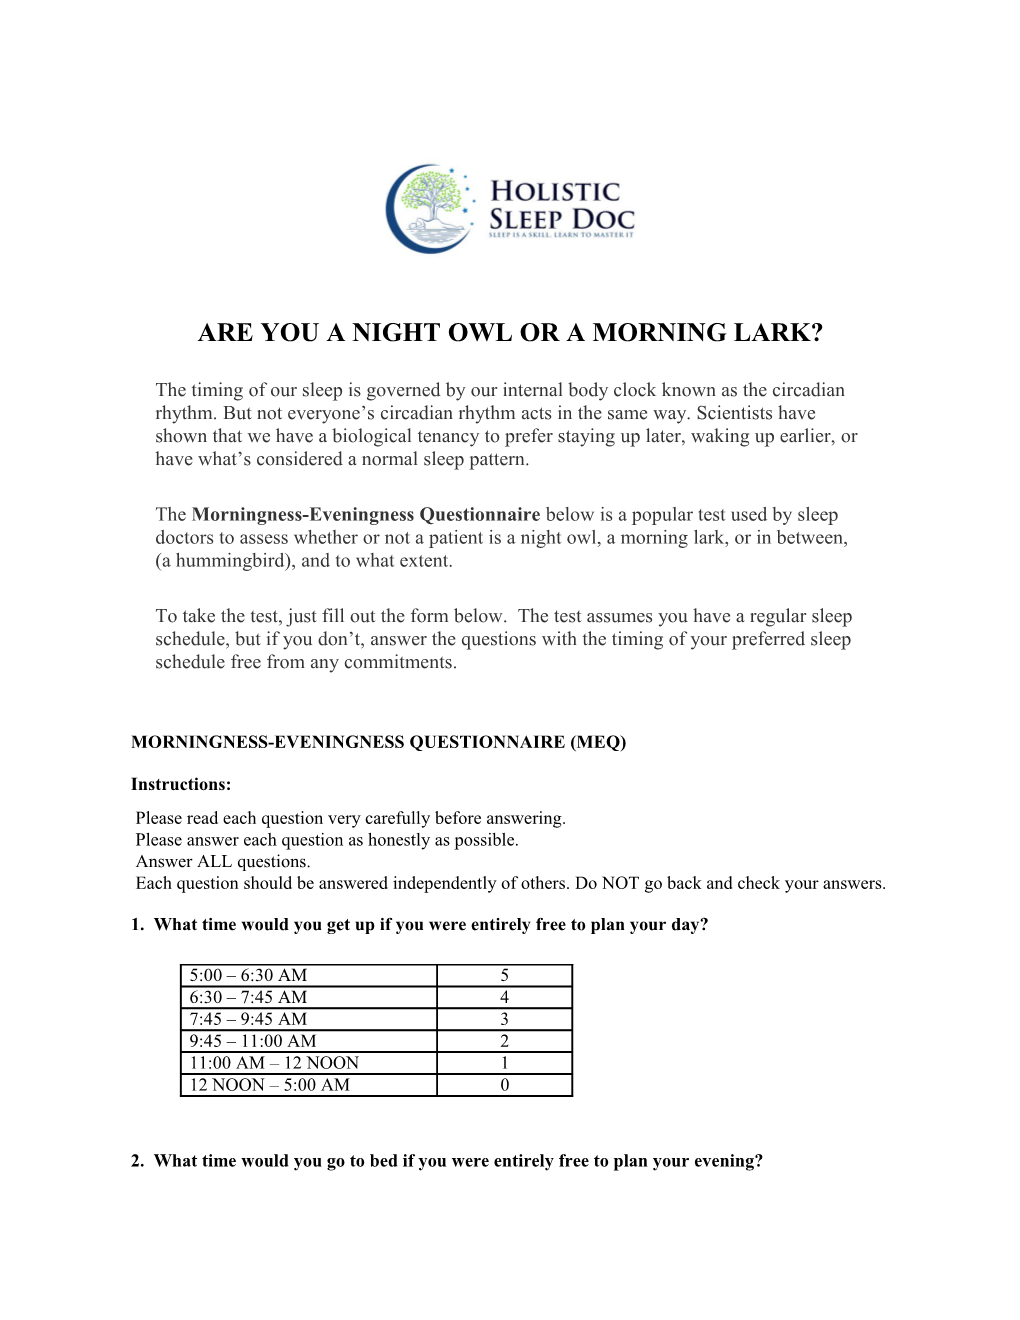 Are You a Night Owl Or a Morning Lark?